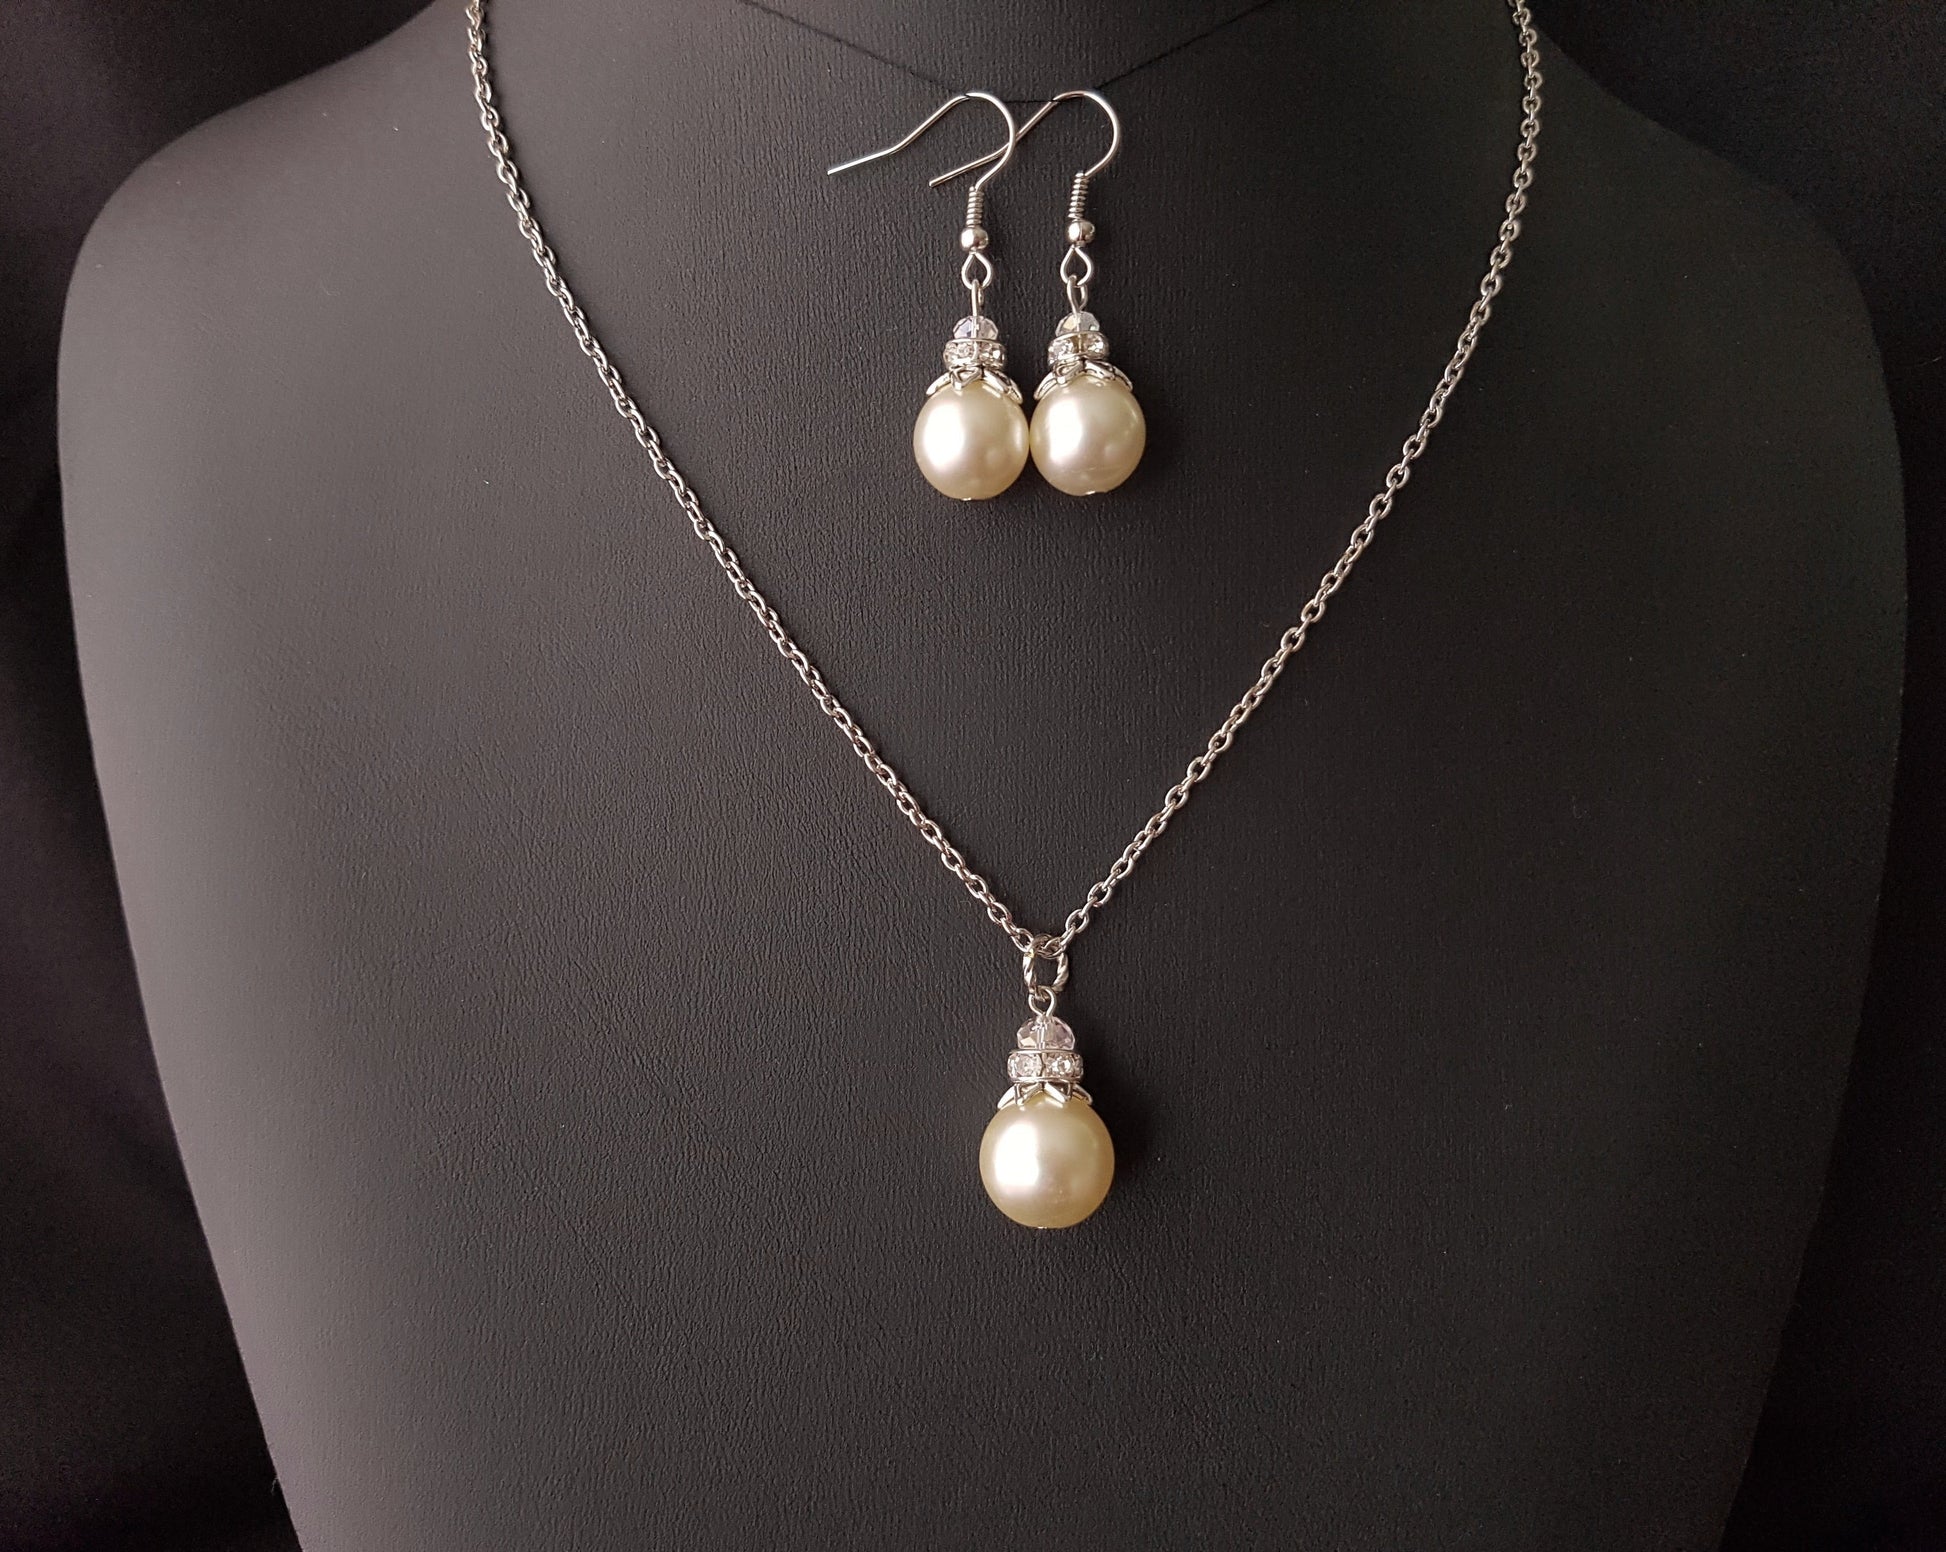 Vintage Pearl and Crystal Art Deco Inspired Necklace and Earrings Set, Pearl Pendant and Dangle Earrings made with Upcycled Vintage Pearl